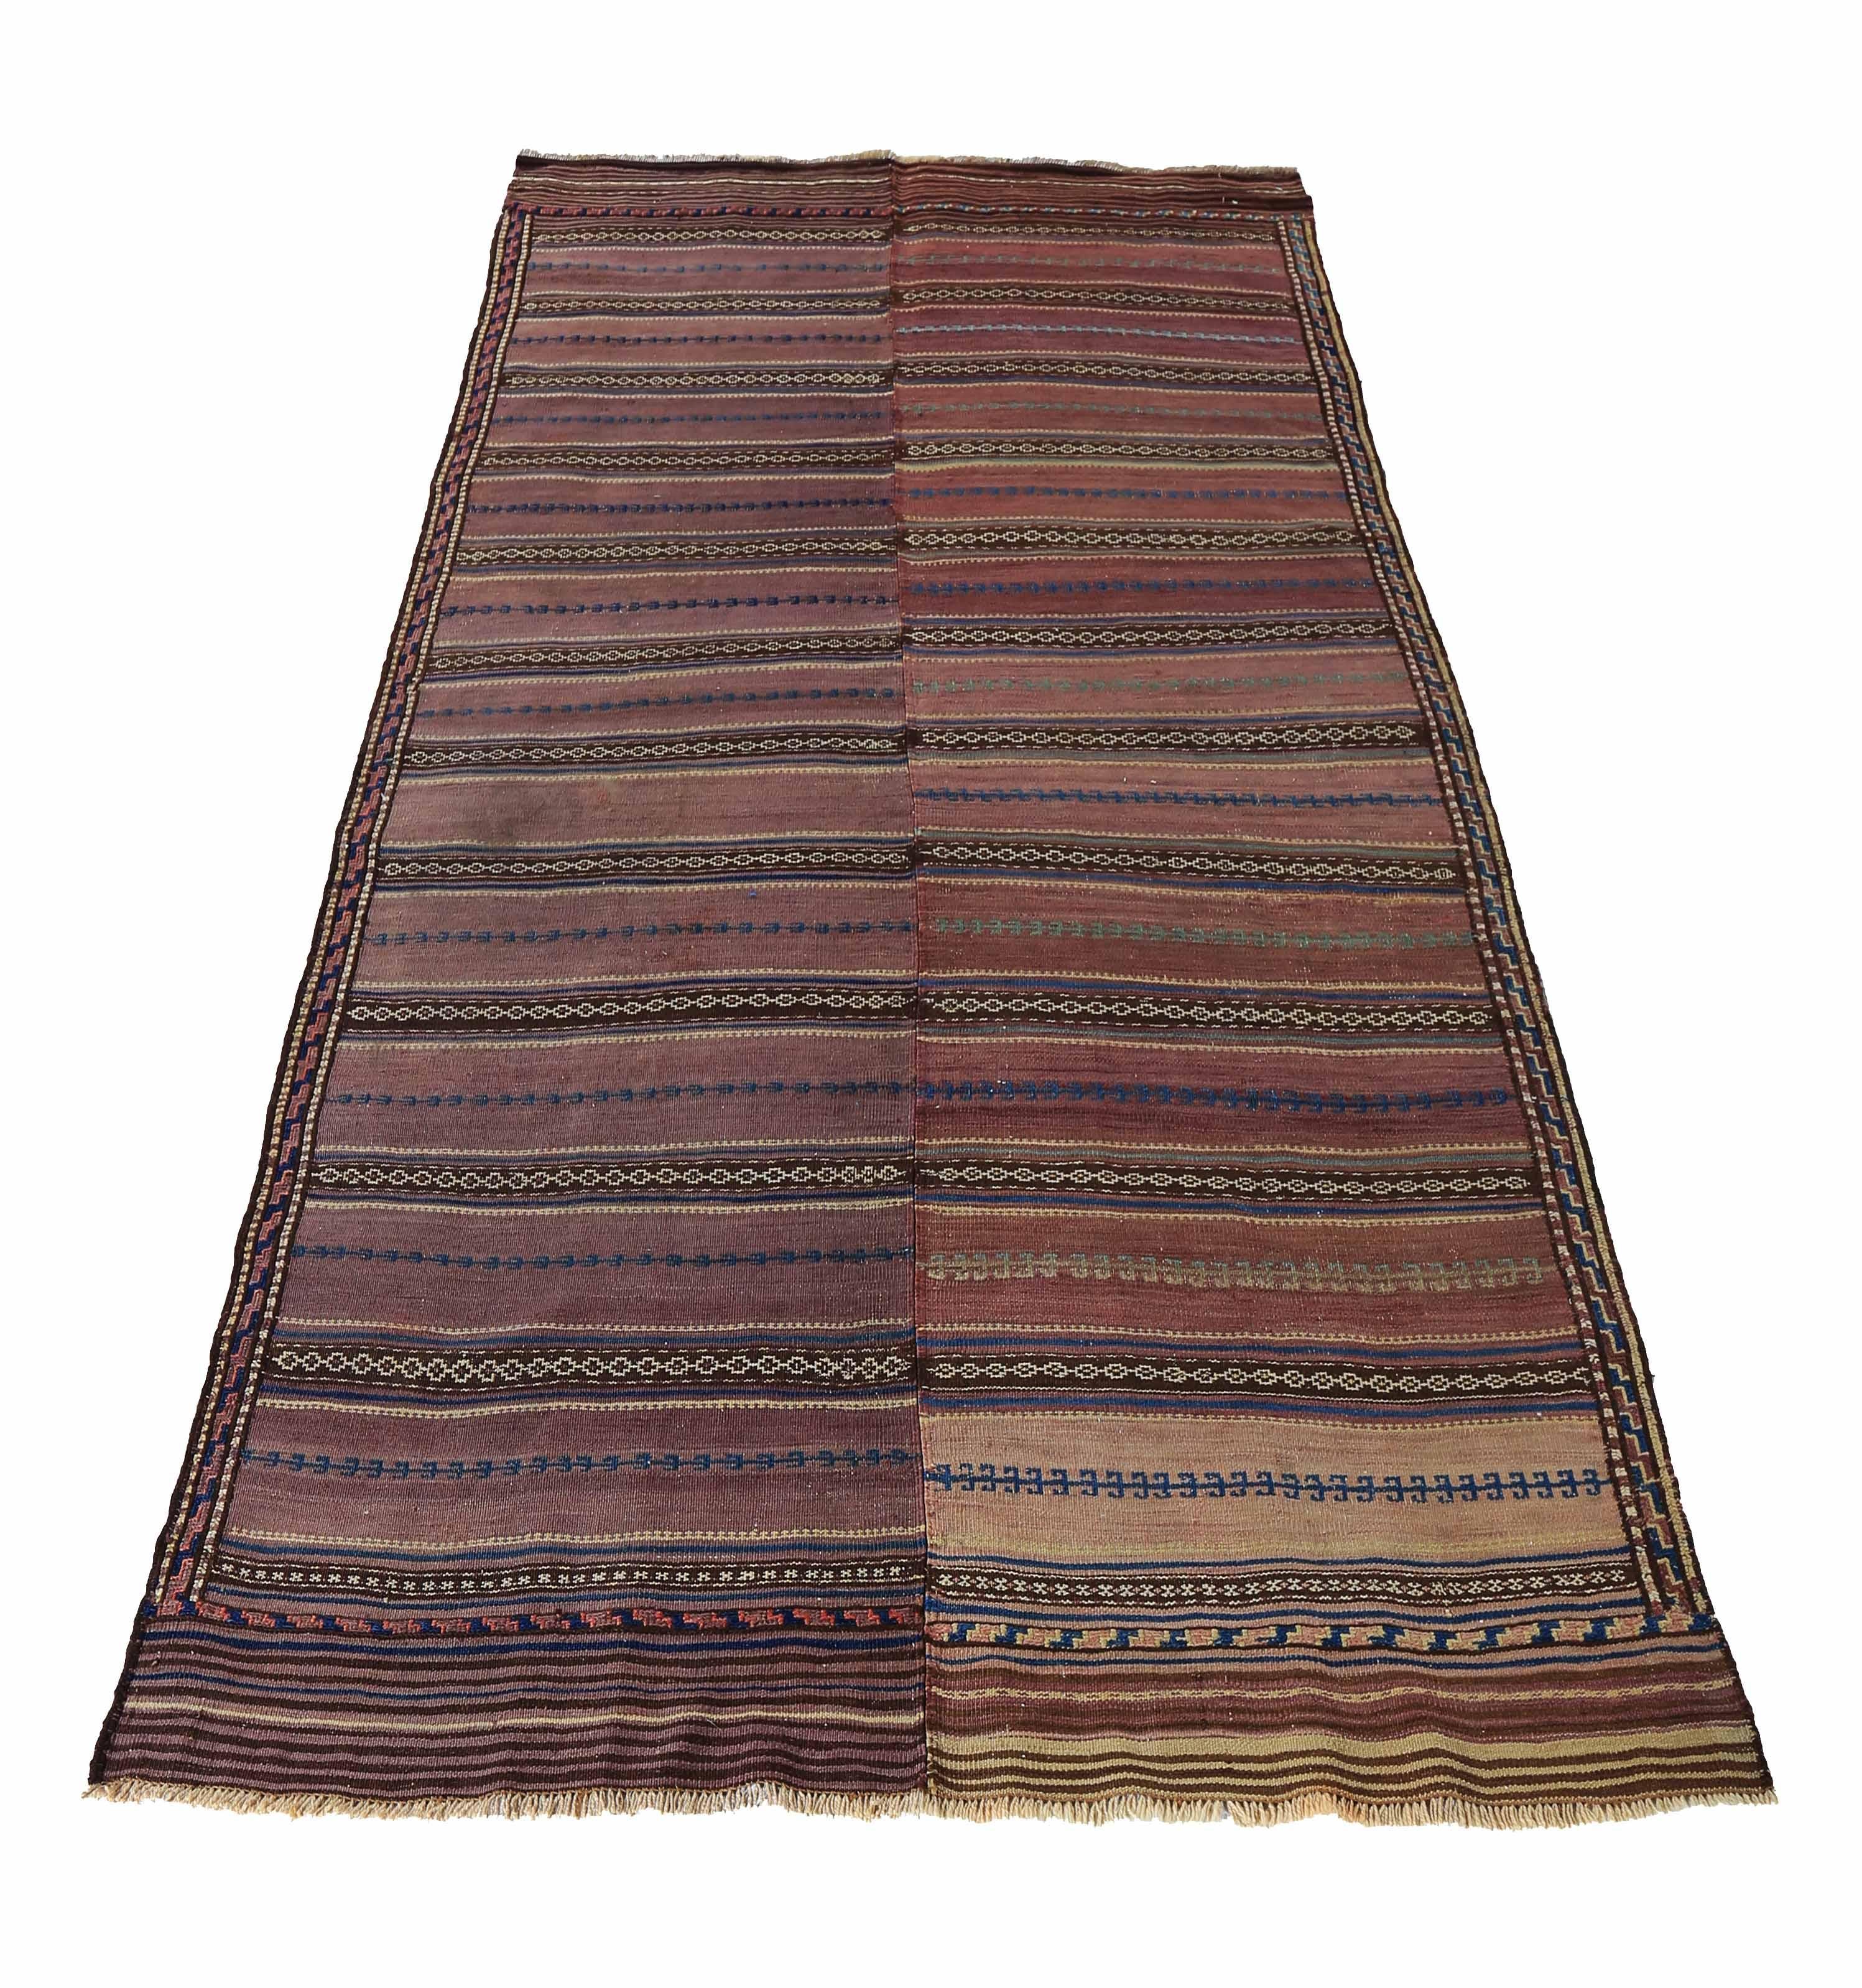 Modern Turkish rug handwoven from the finest sheep’s wool and colored with all-natural vegetable dyes that are safe for humans and pets. It’s a traditional Kilim flat-weave design featuring navy and white tribal details on a brown field. It’s a